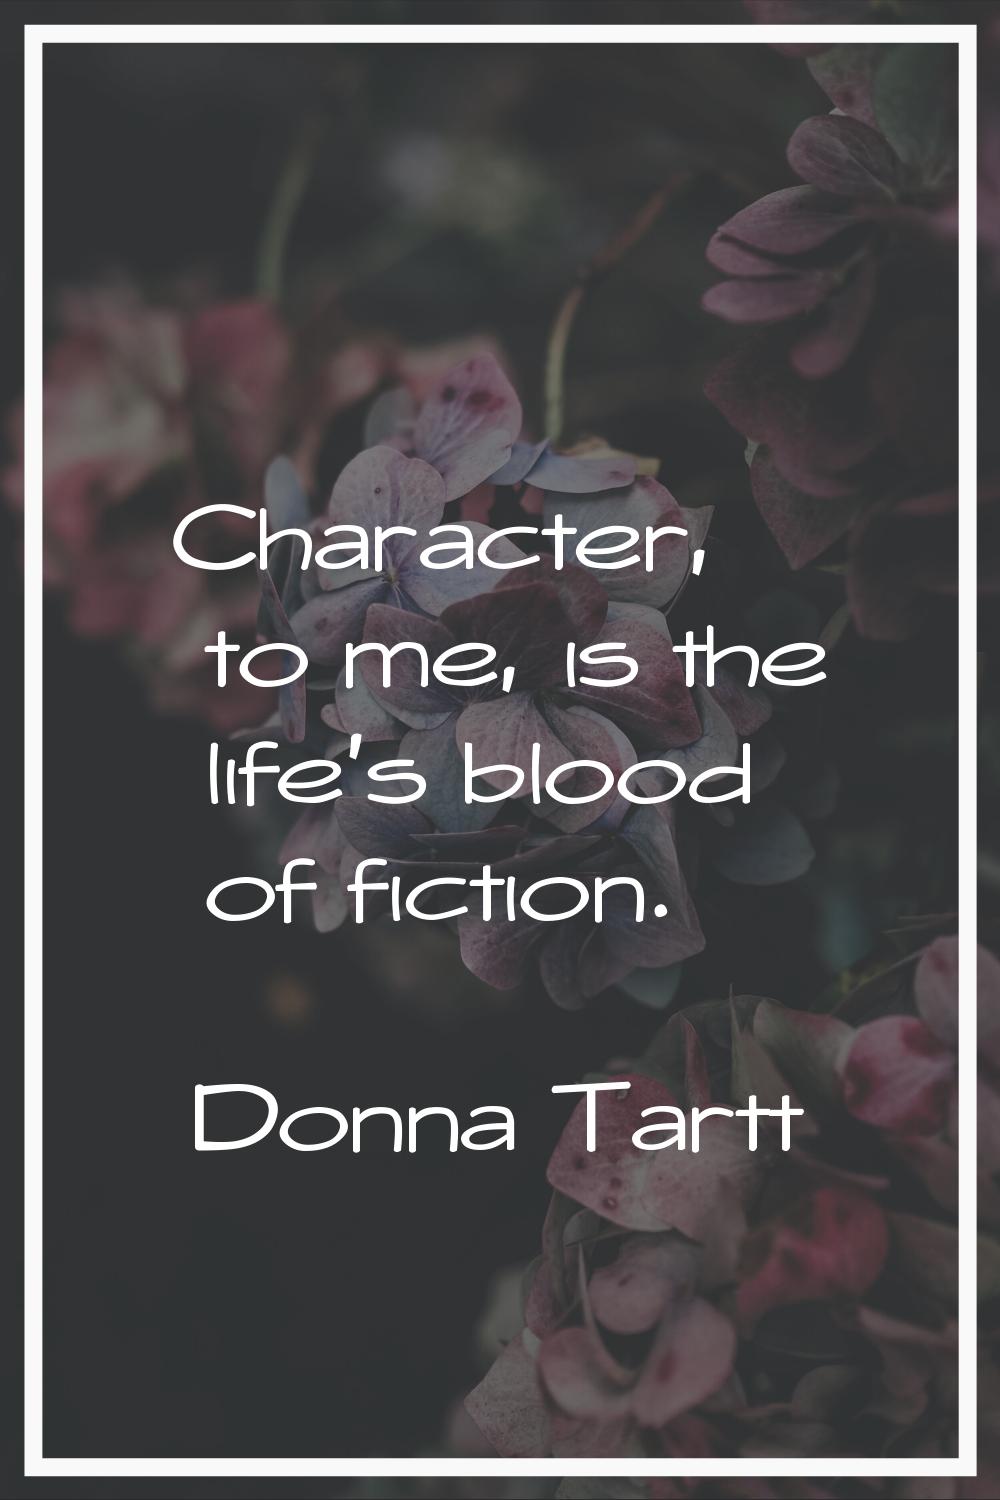 Character, to me, is the life's blood of fiction.